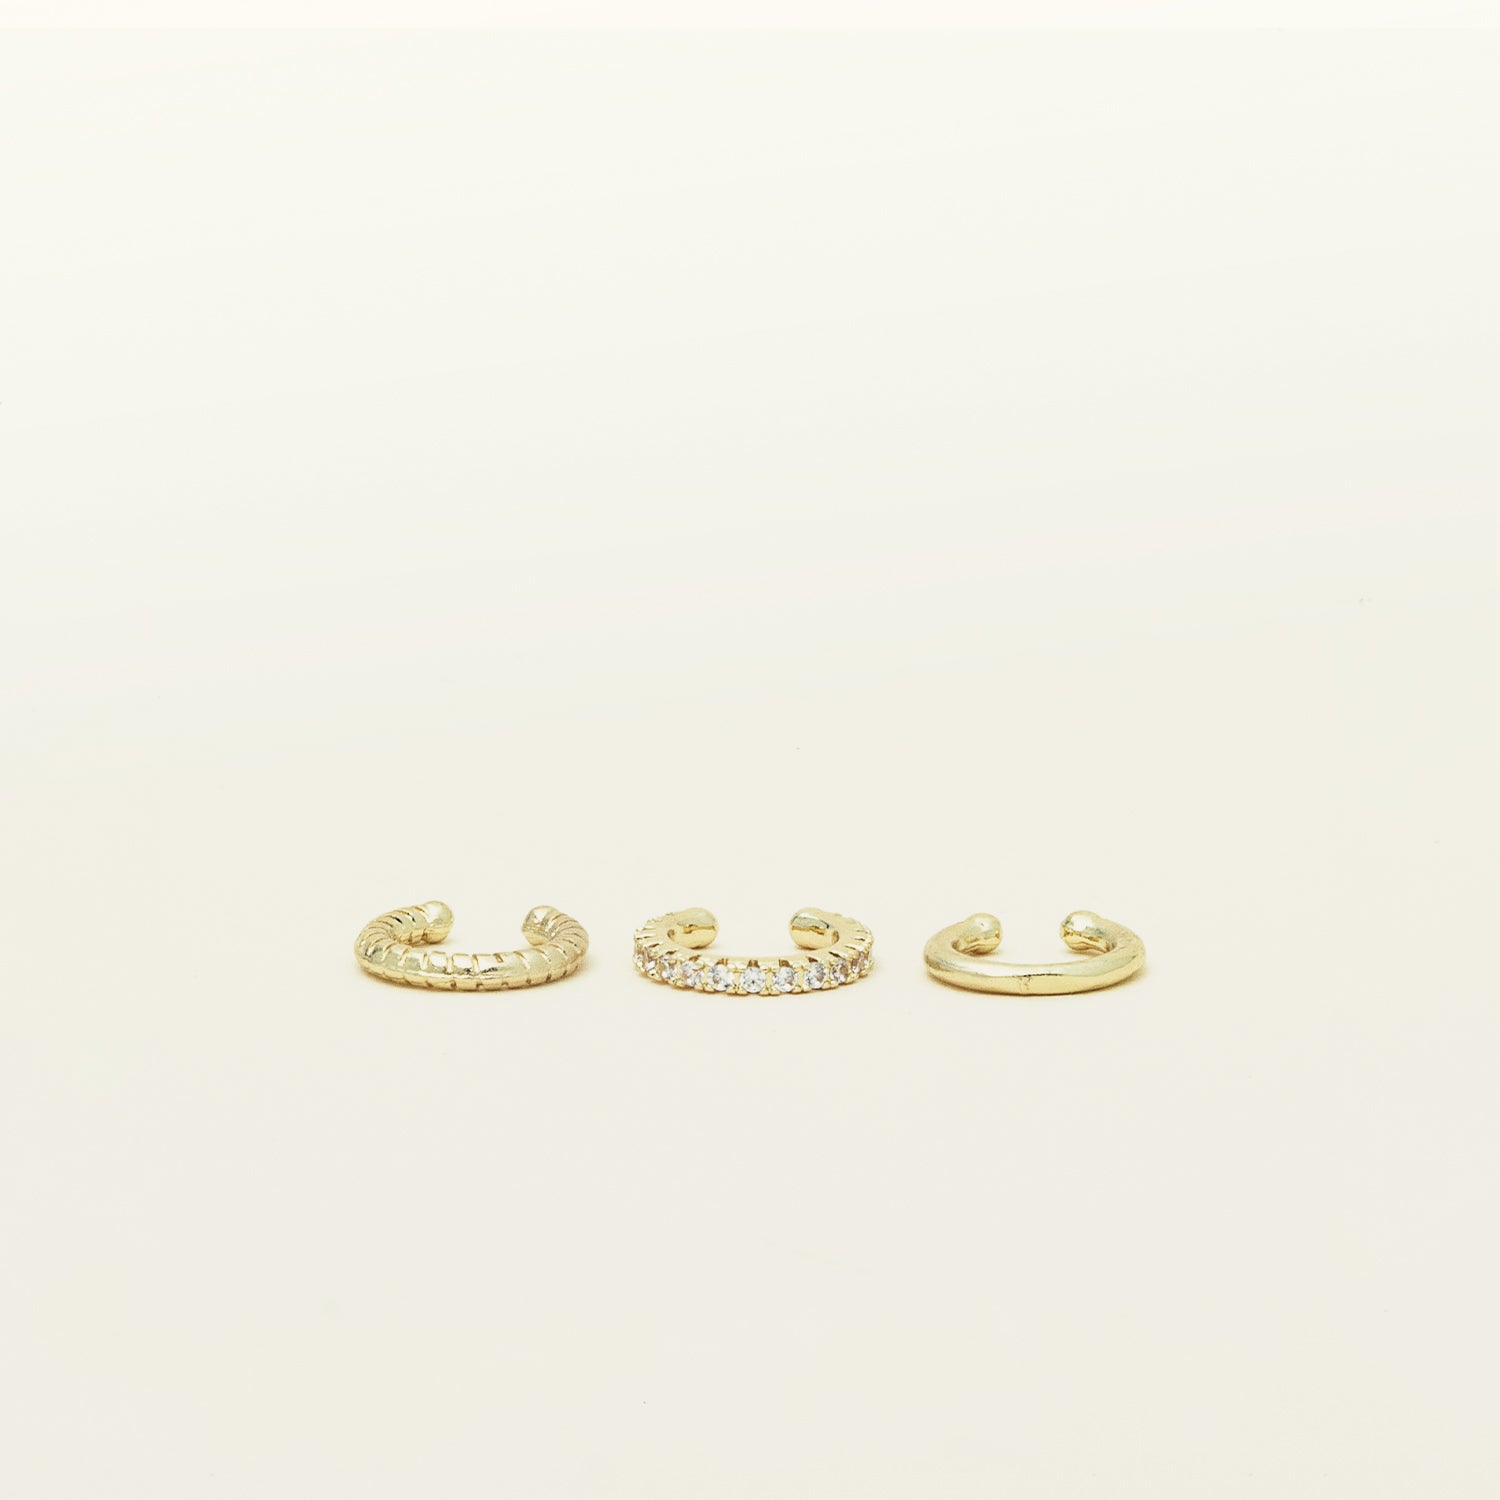 Image of the set includes three pieces of ear cuffs finished in gold-tone plated alloy with cubic zirconia accents. This set is also available in silver.